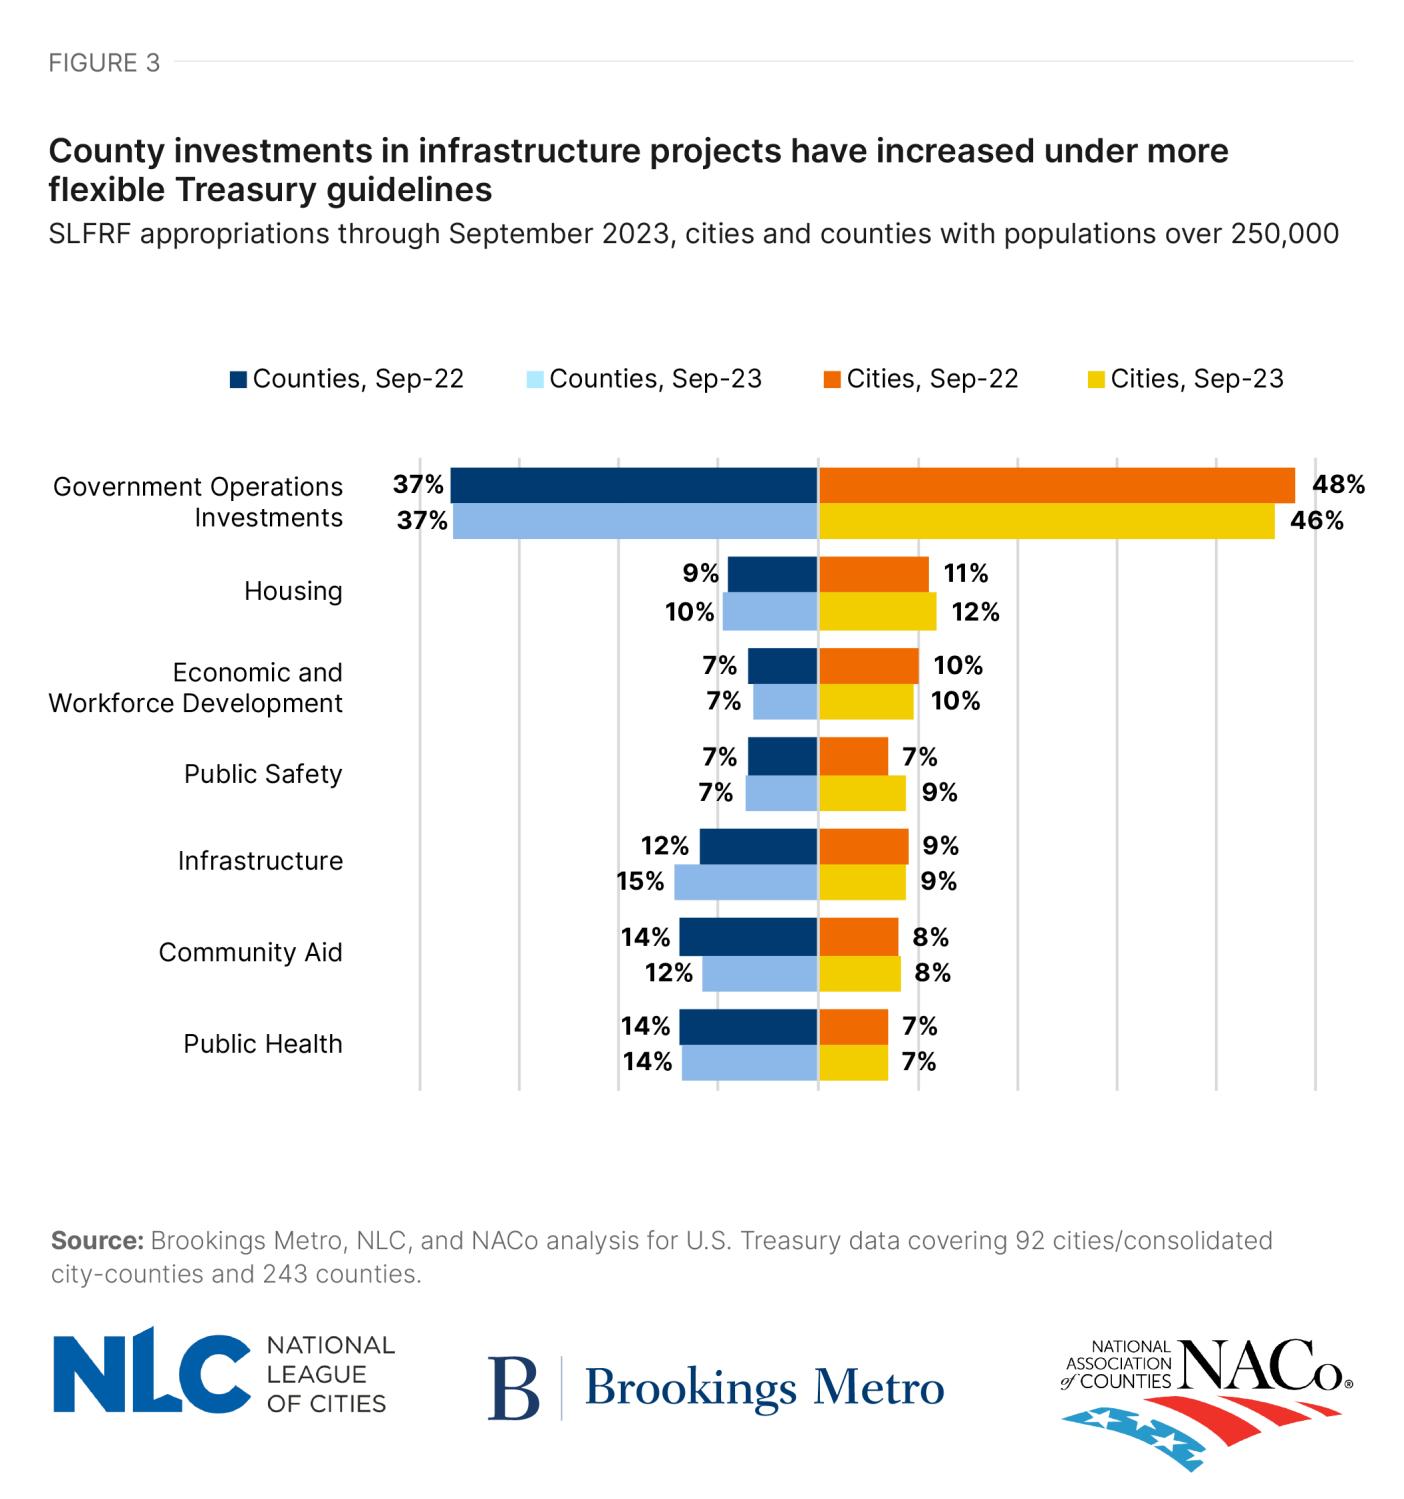 Figure 3: County investments in infrastructure projects have increased under more flexible Treasury guidelines